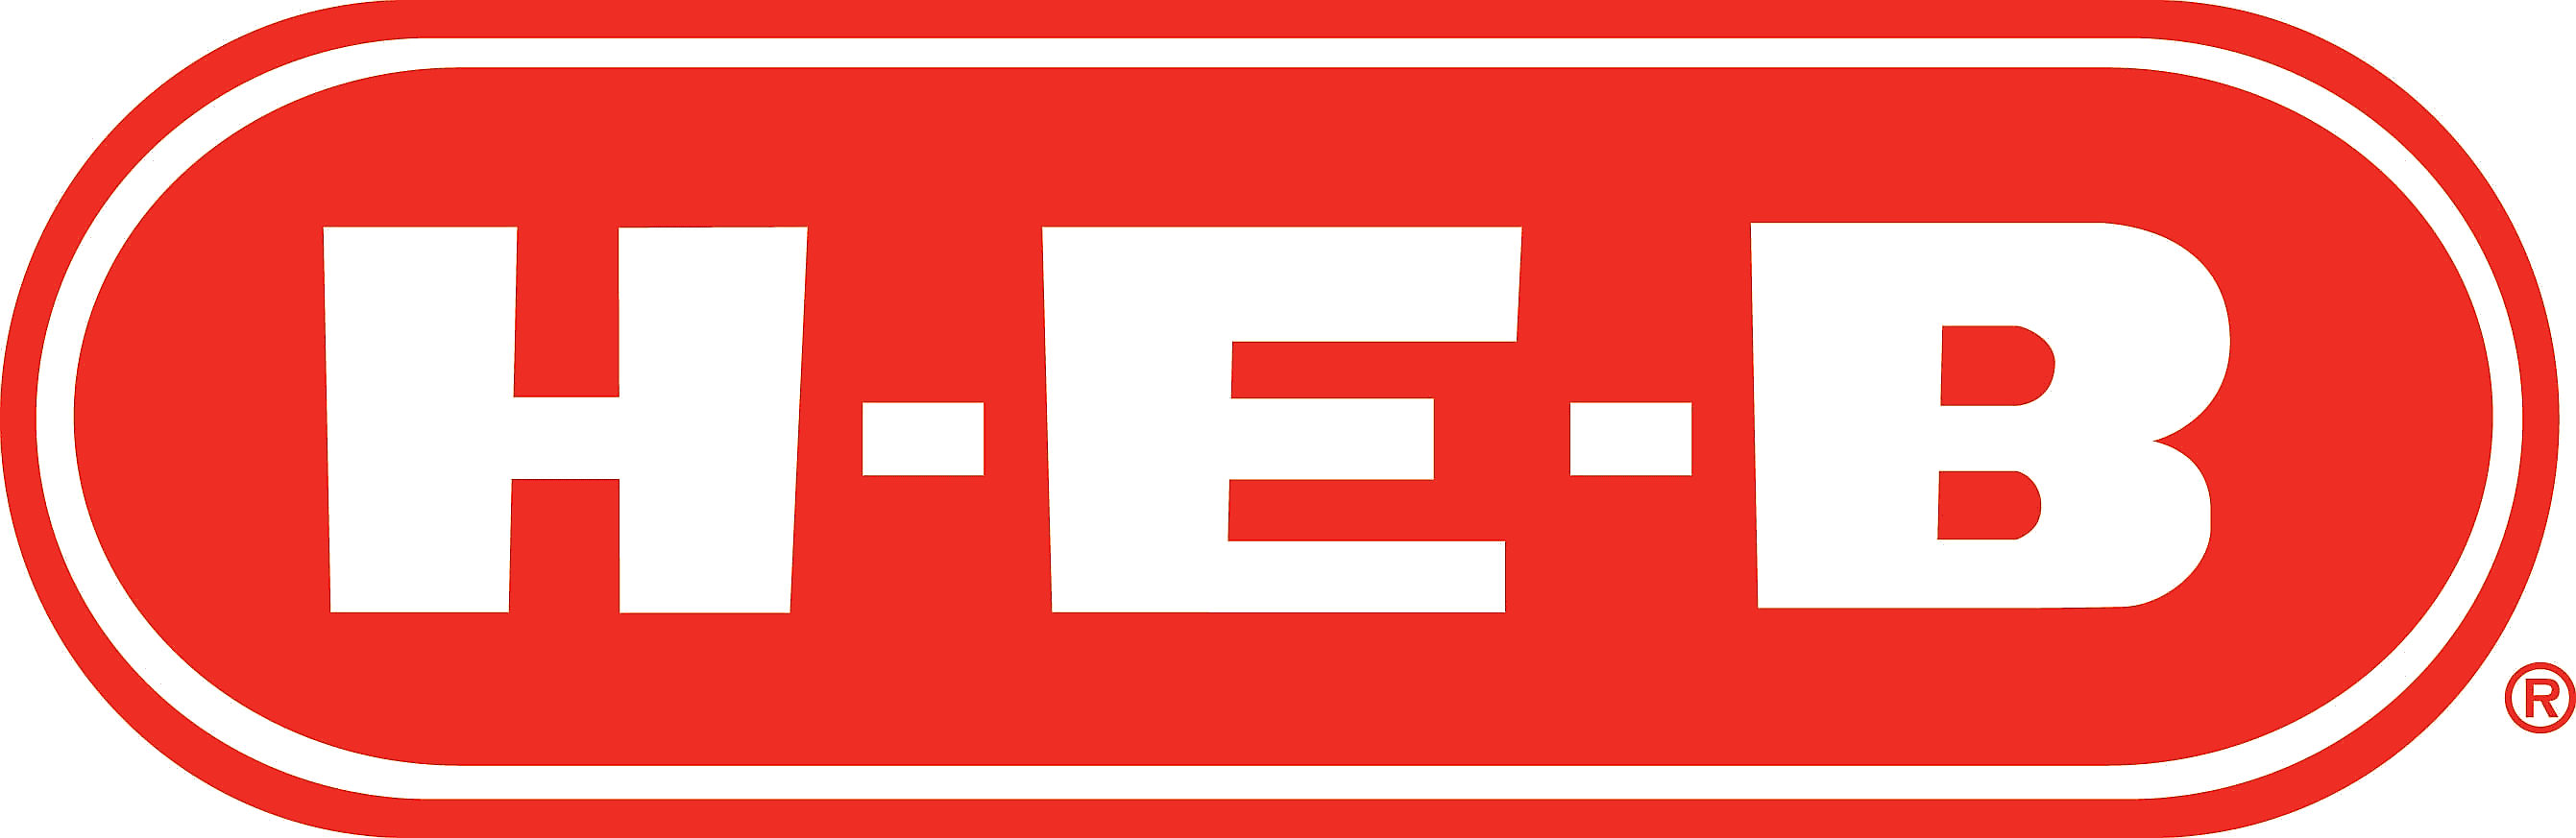 Red Rectangle Company Logo - File:Logo of the HEB Grocery Company, LP.png - Wikimedia Commons